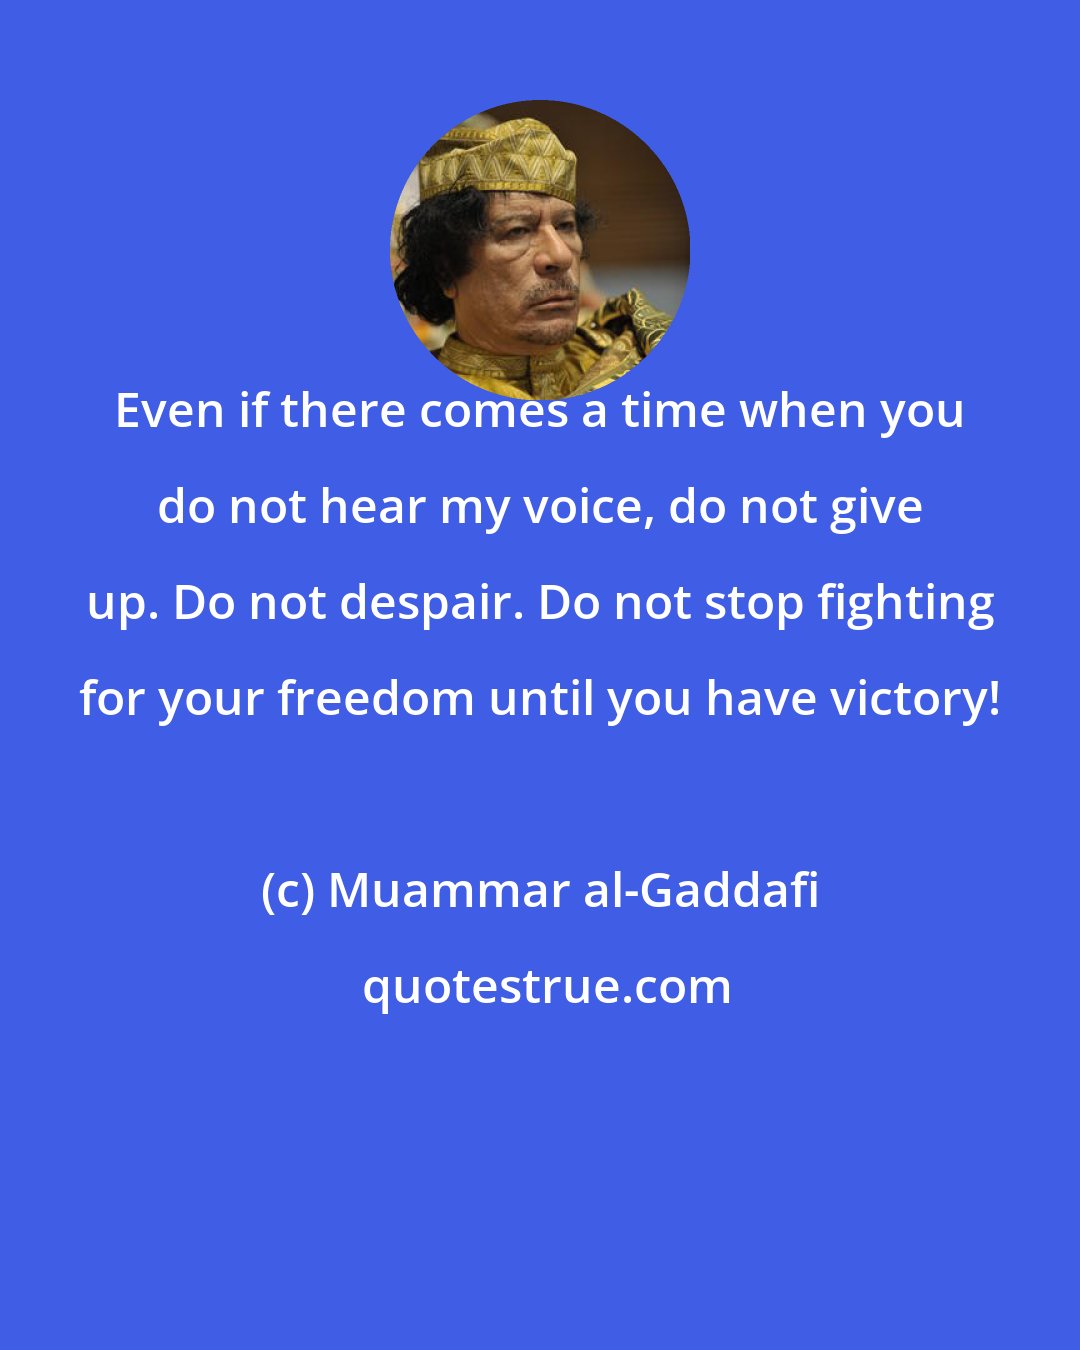 Muammar al-Gaddafi: Even if there comes a time when you do not hear my voice, do not give up. Do not despair. Do not stop fighting for your freedom until you have victory!